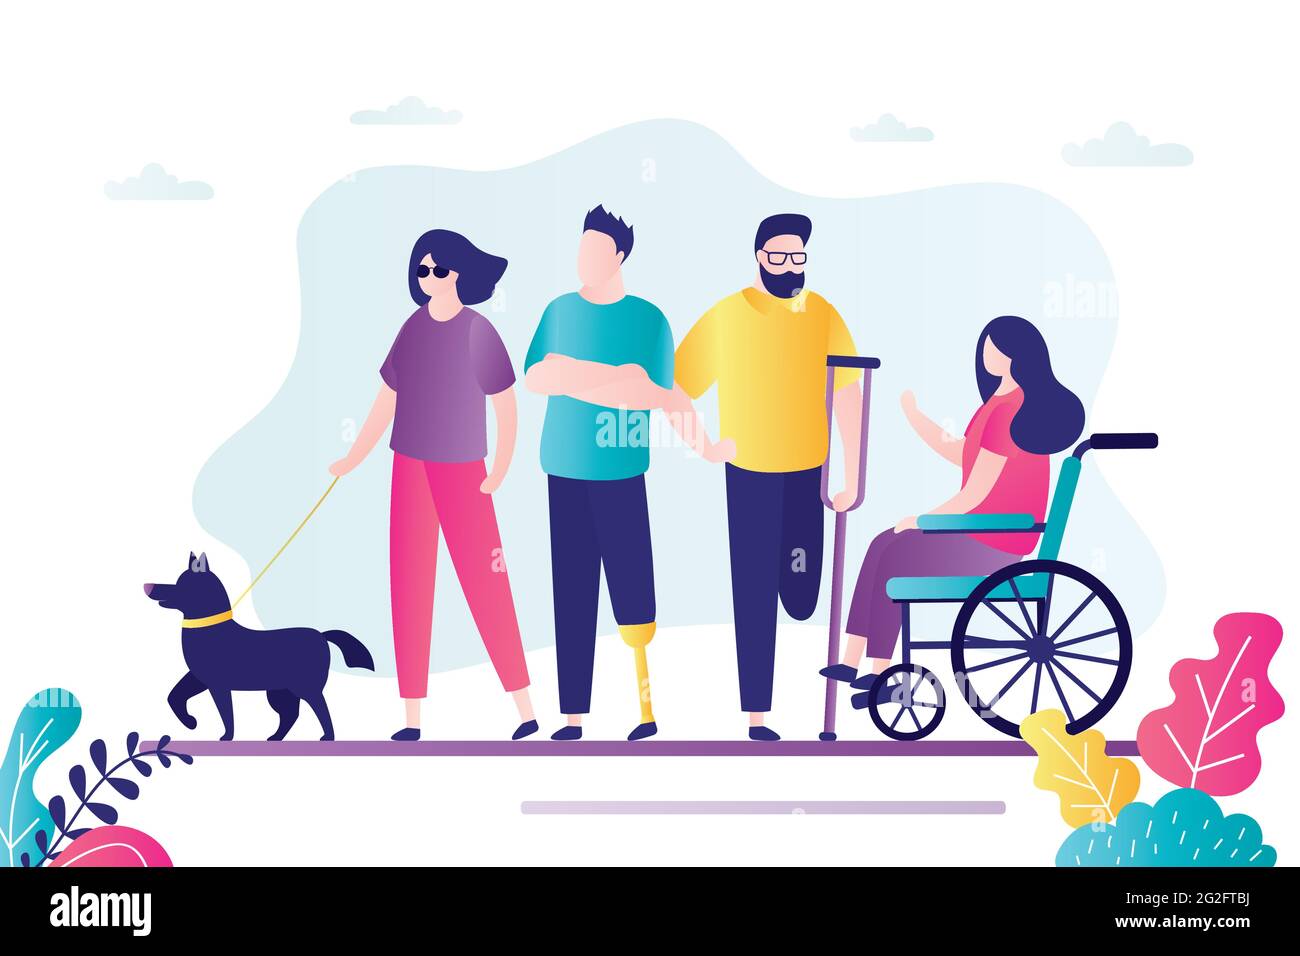 Group of different persons with disabilities. Female character sitting in wheelchair.  Various disabled people set. Blind woman with dog escort. Hands Stock Vector